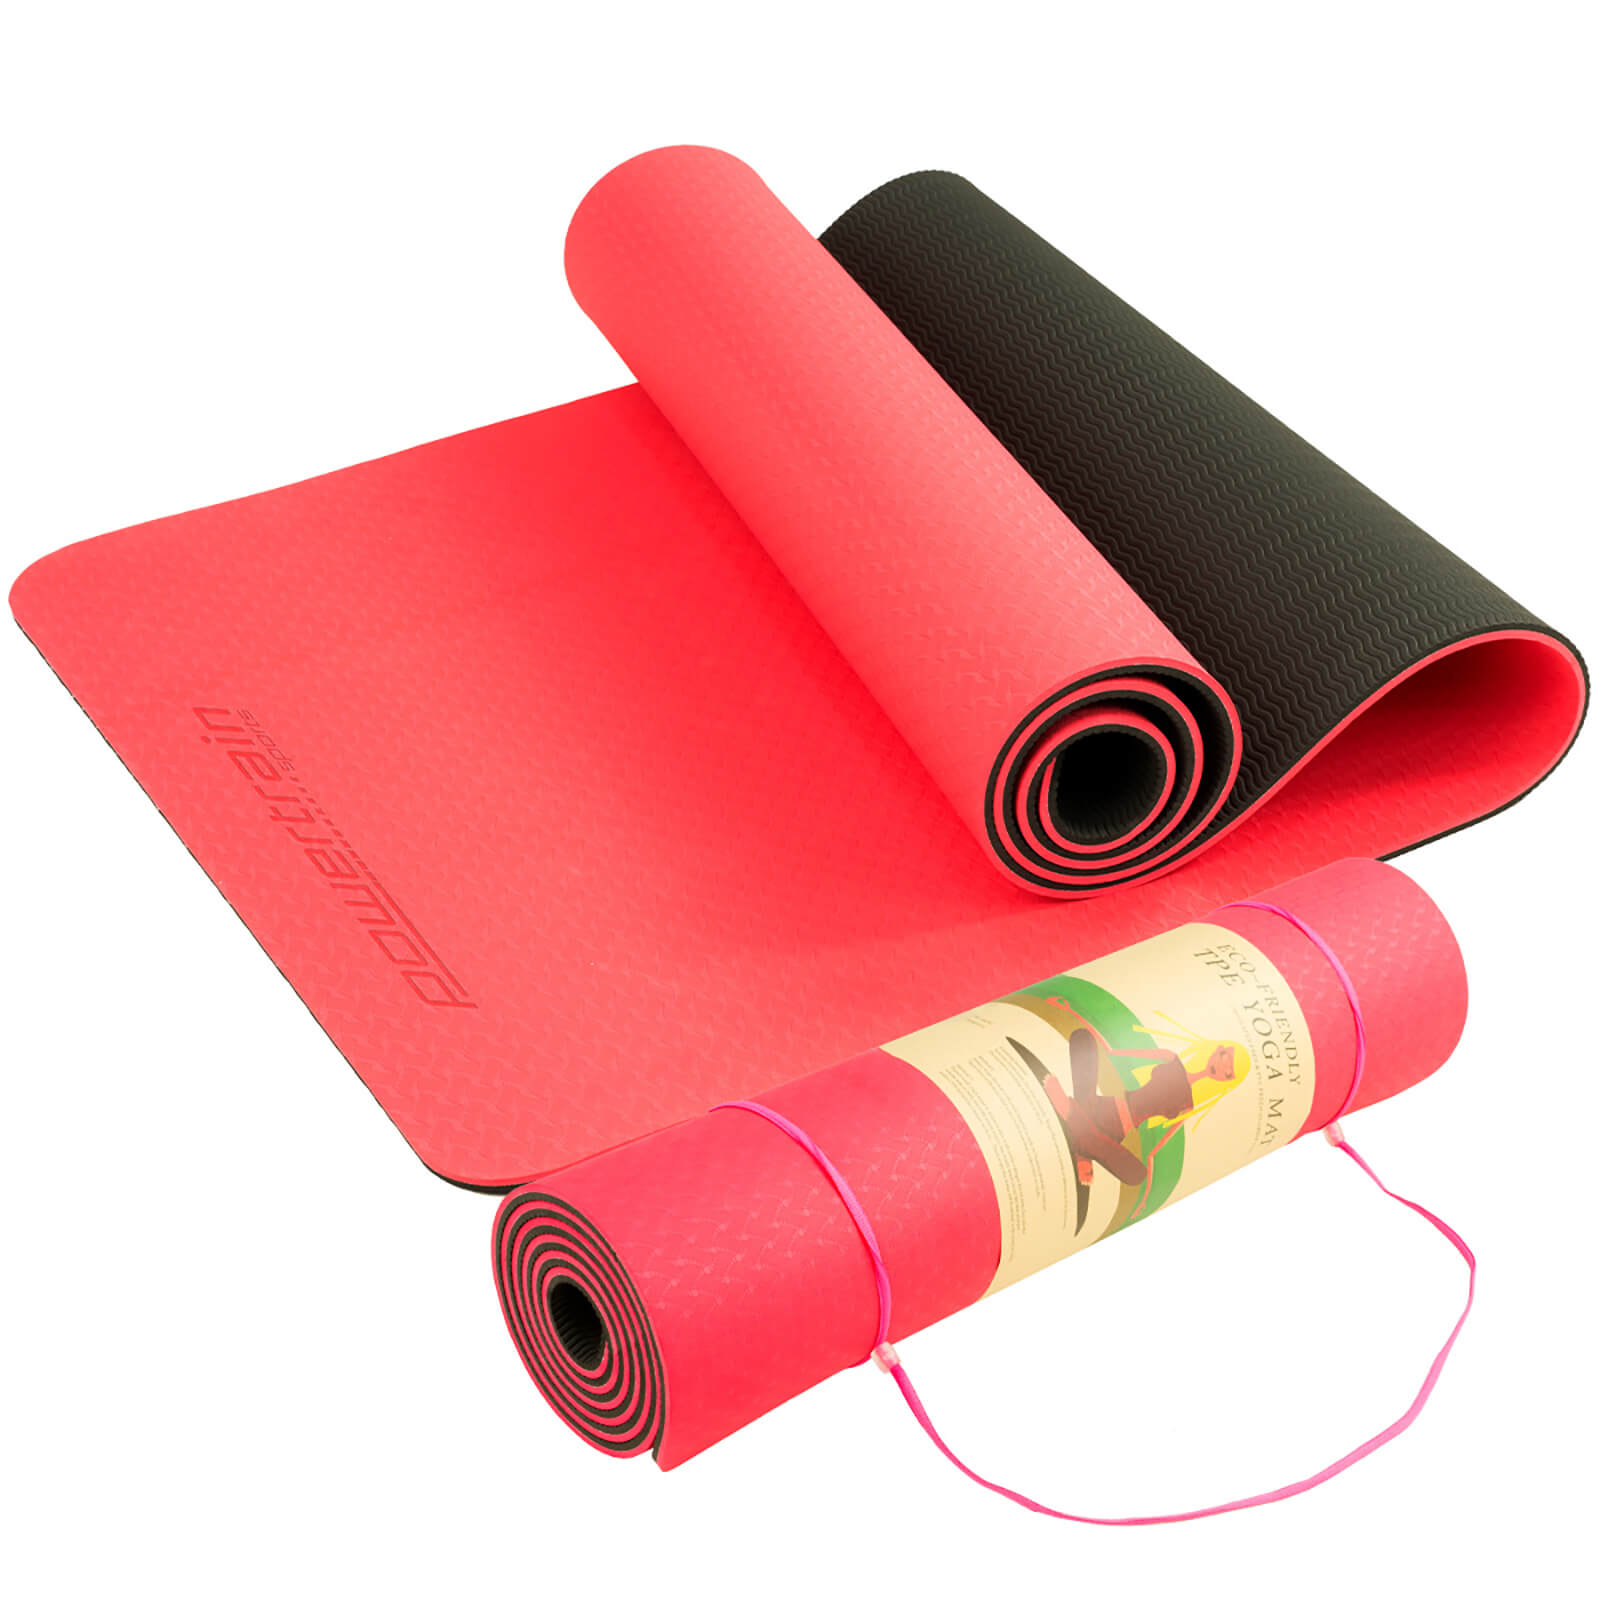 Ultimate Yoga Mat: Eco-Friendly, Superior Grip & Durability for